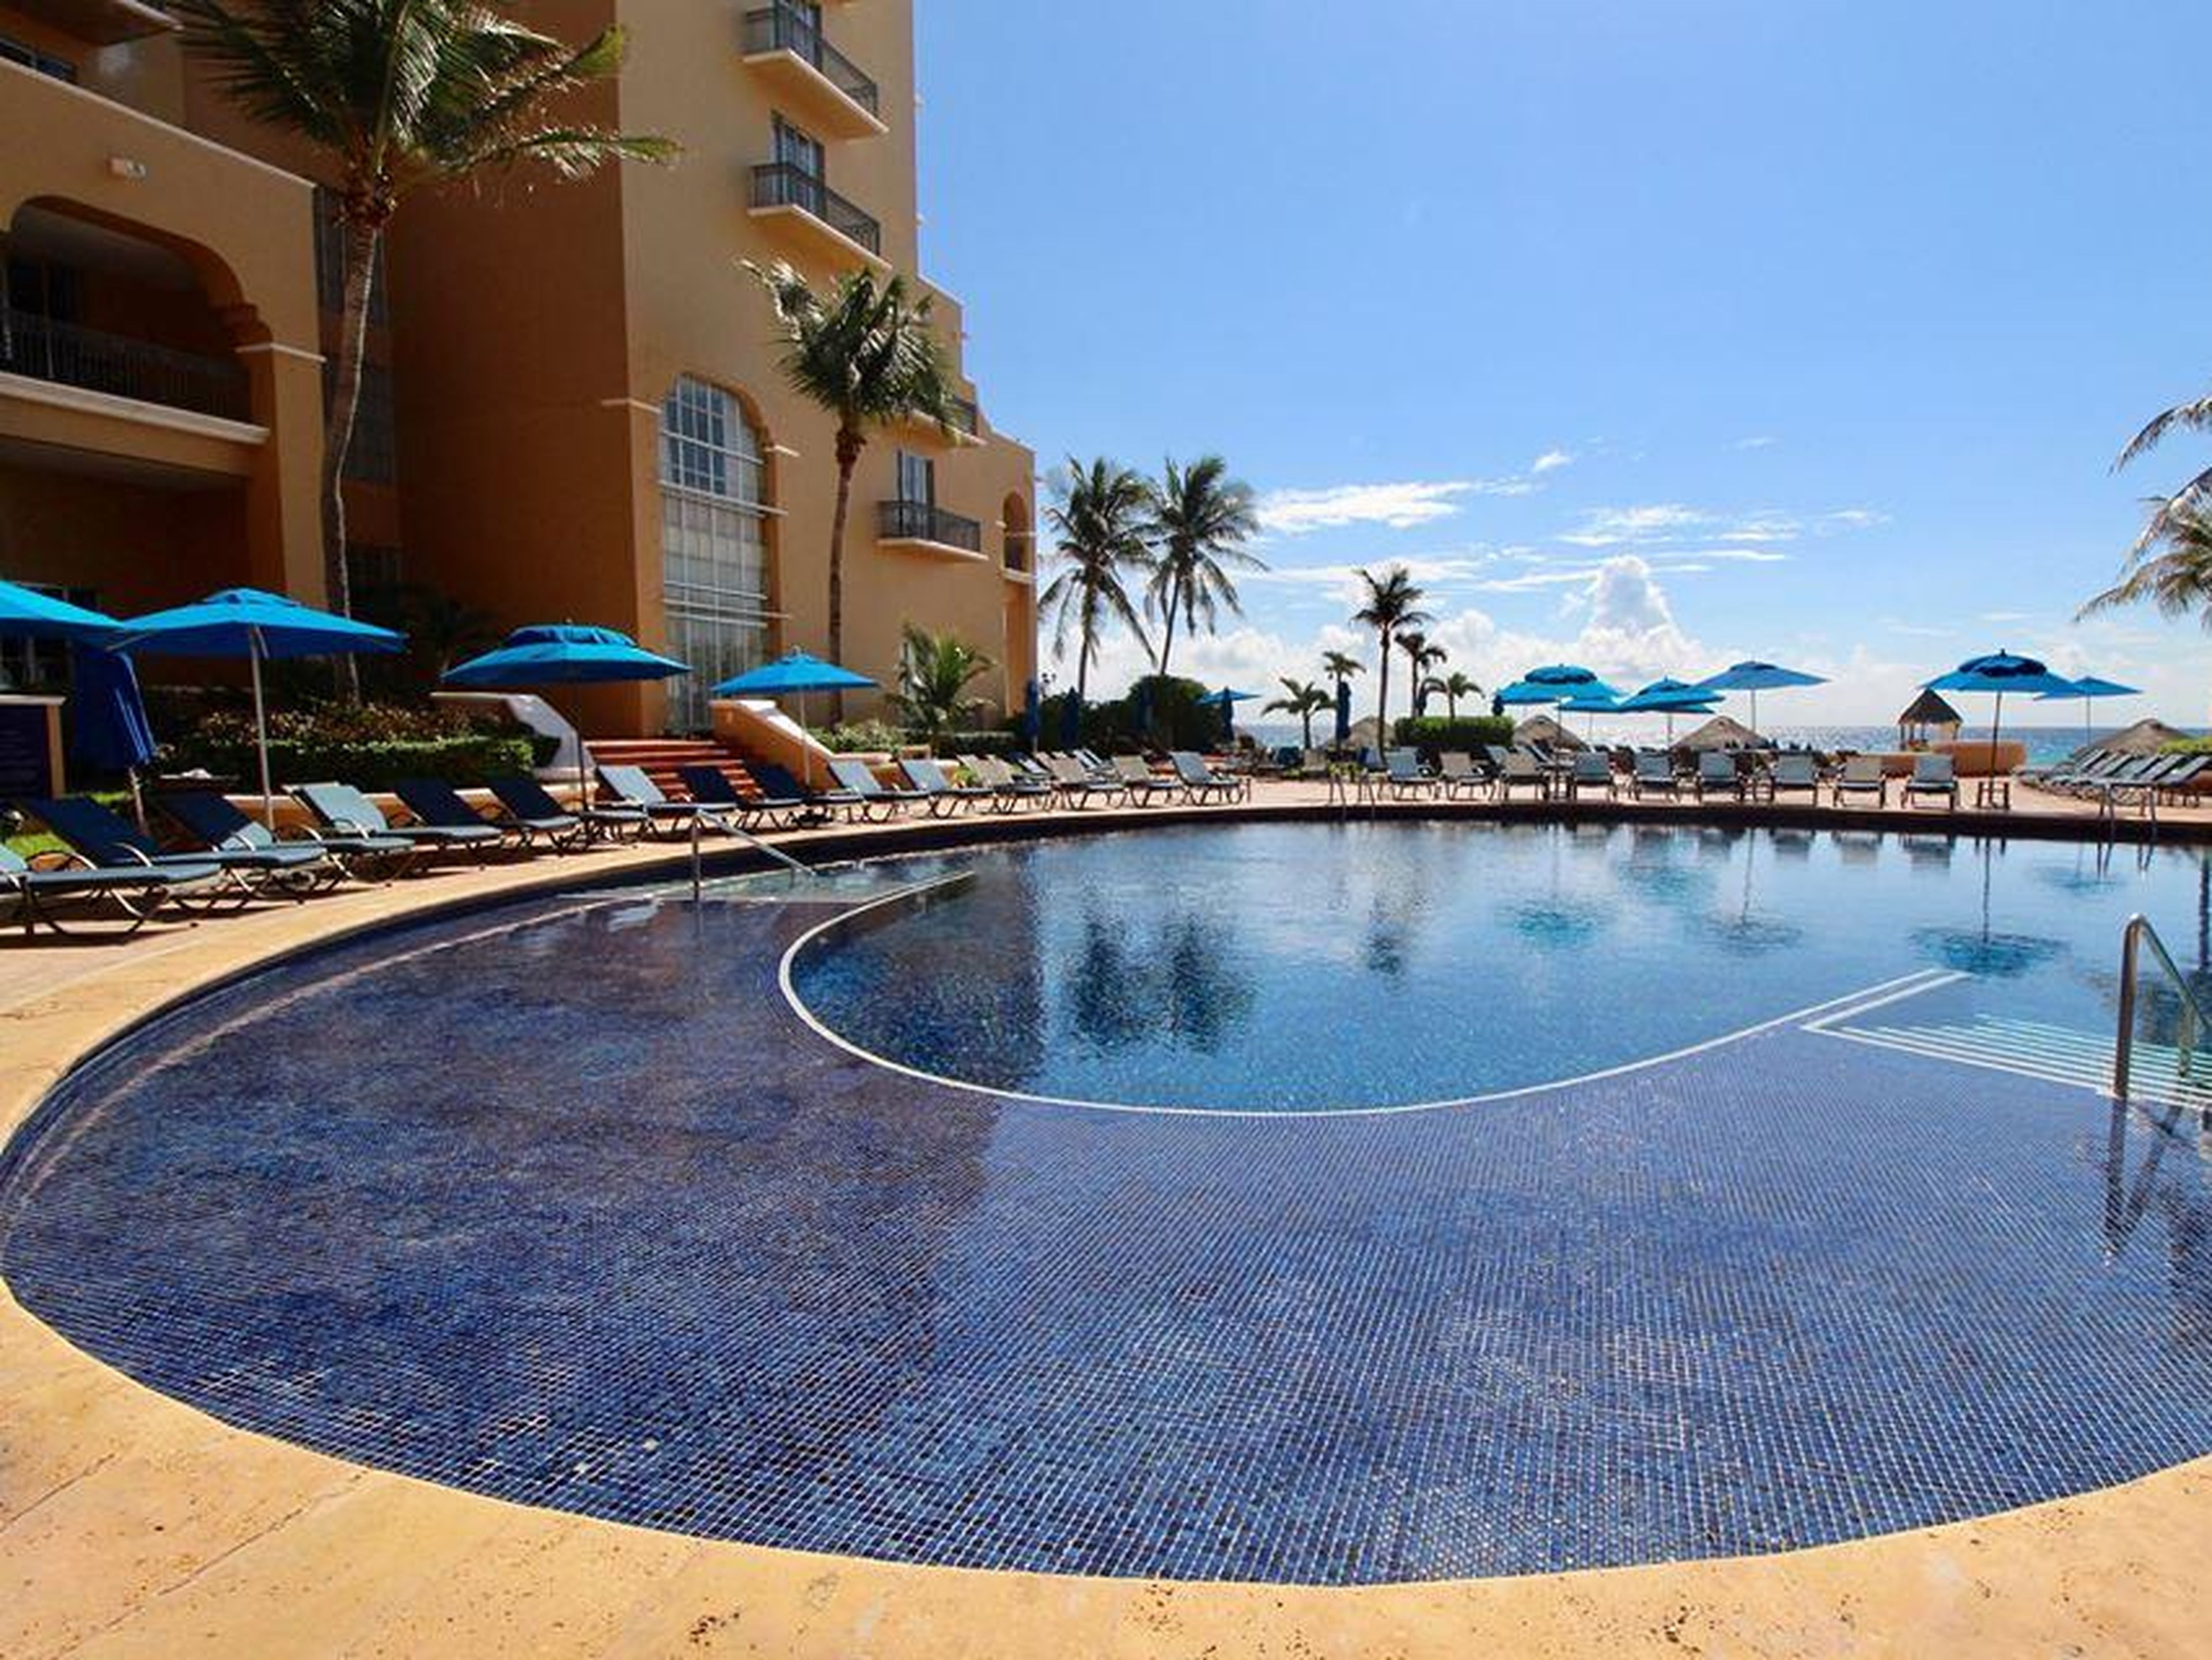 When you think of Cancún, you probably think of stunning oceanfront resorts…